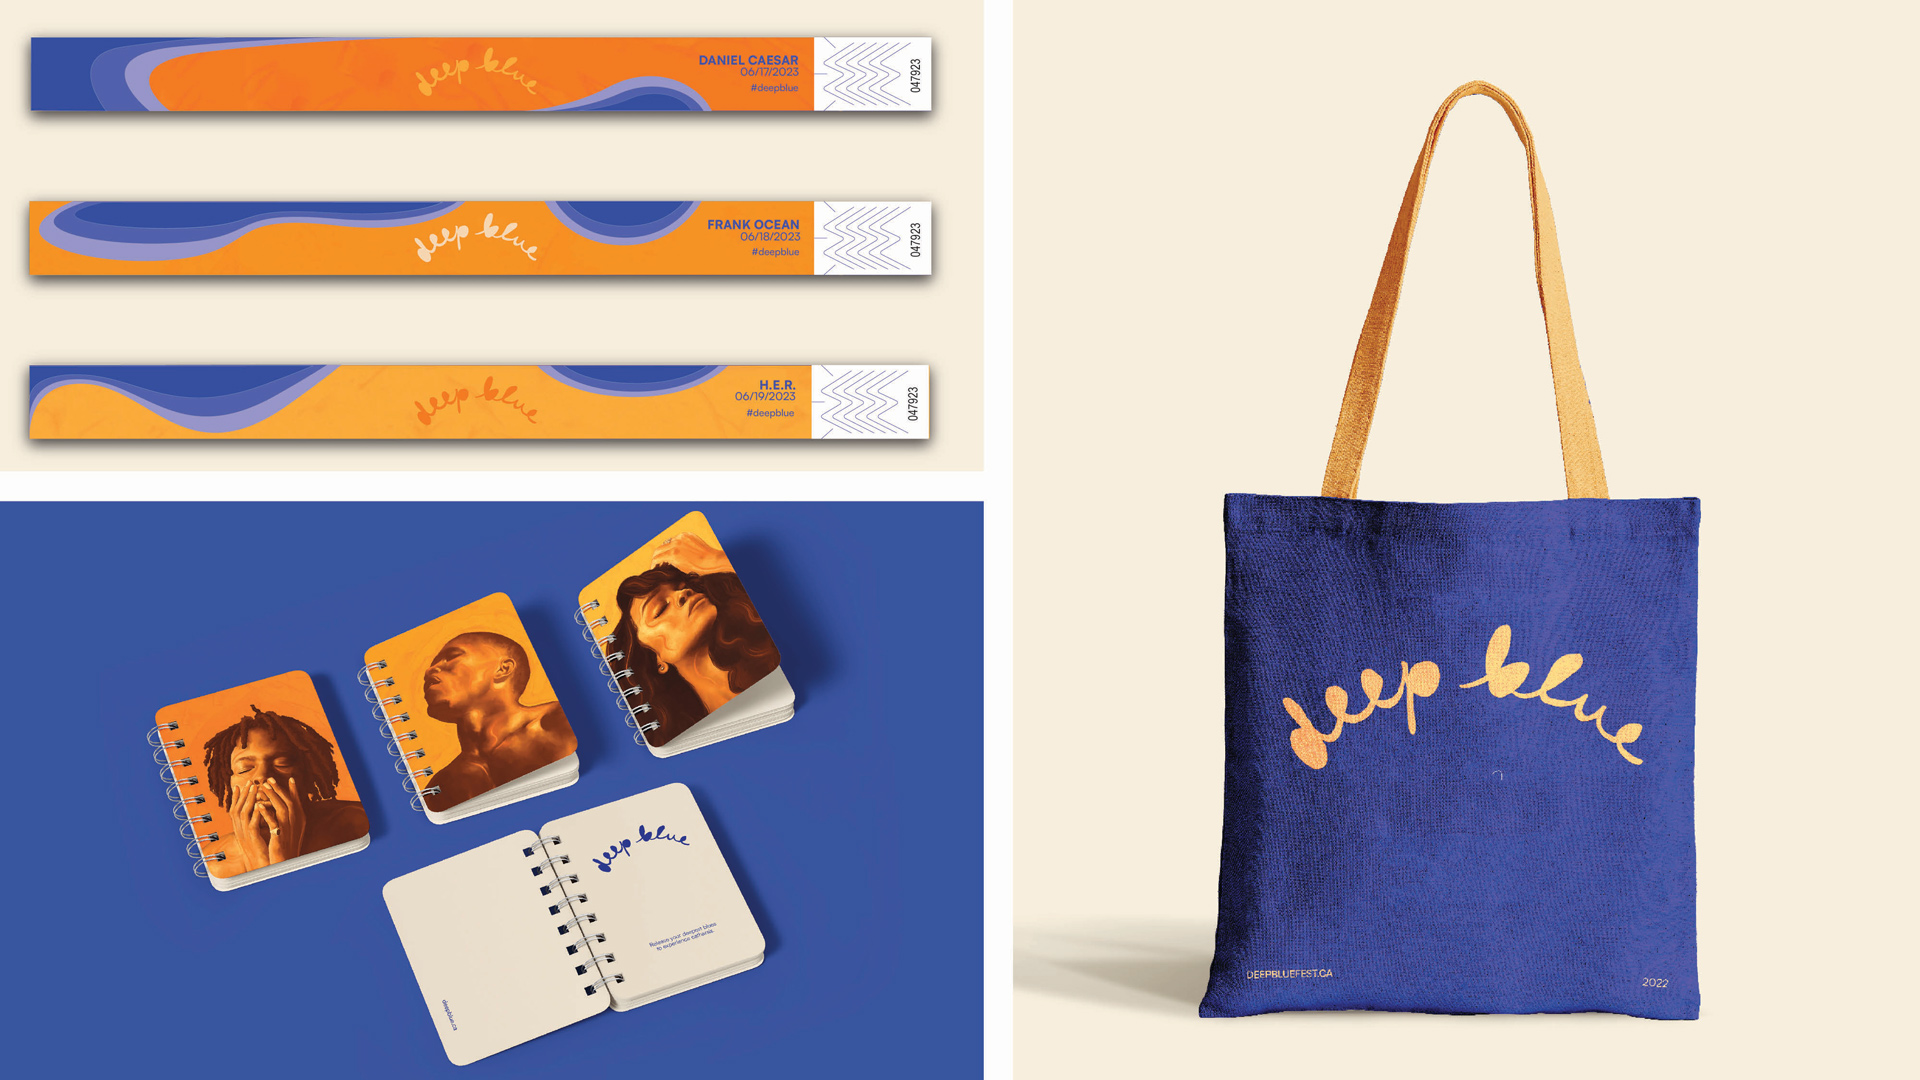 Wristbands, notebooks, and a tote bag showcasing the branding for Deep Blue music festival, utilizing blue, orange, and the Deep Blue logo.